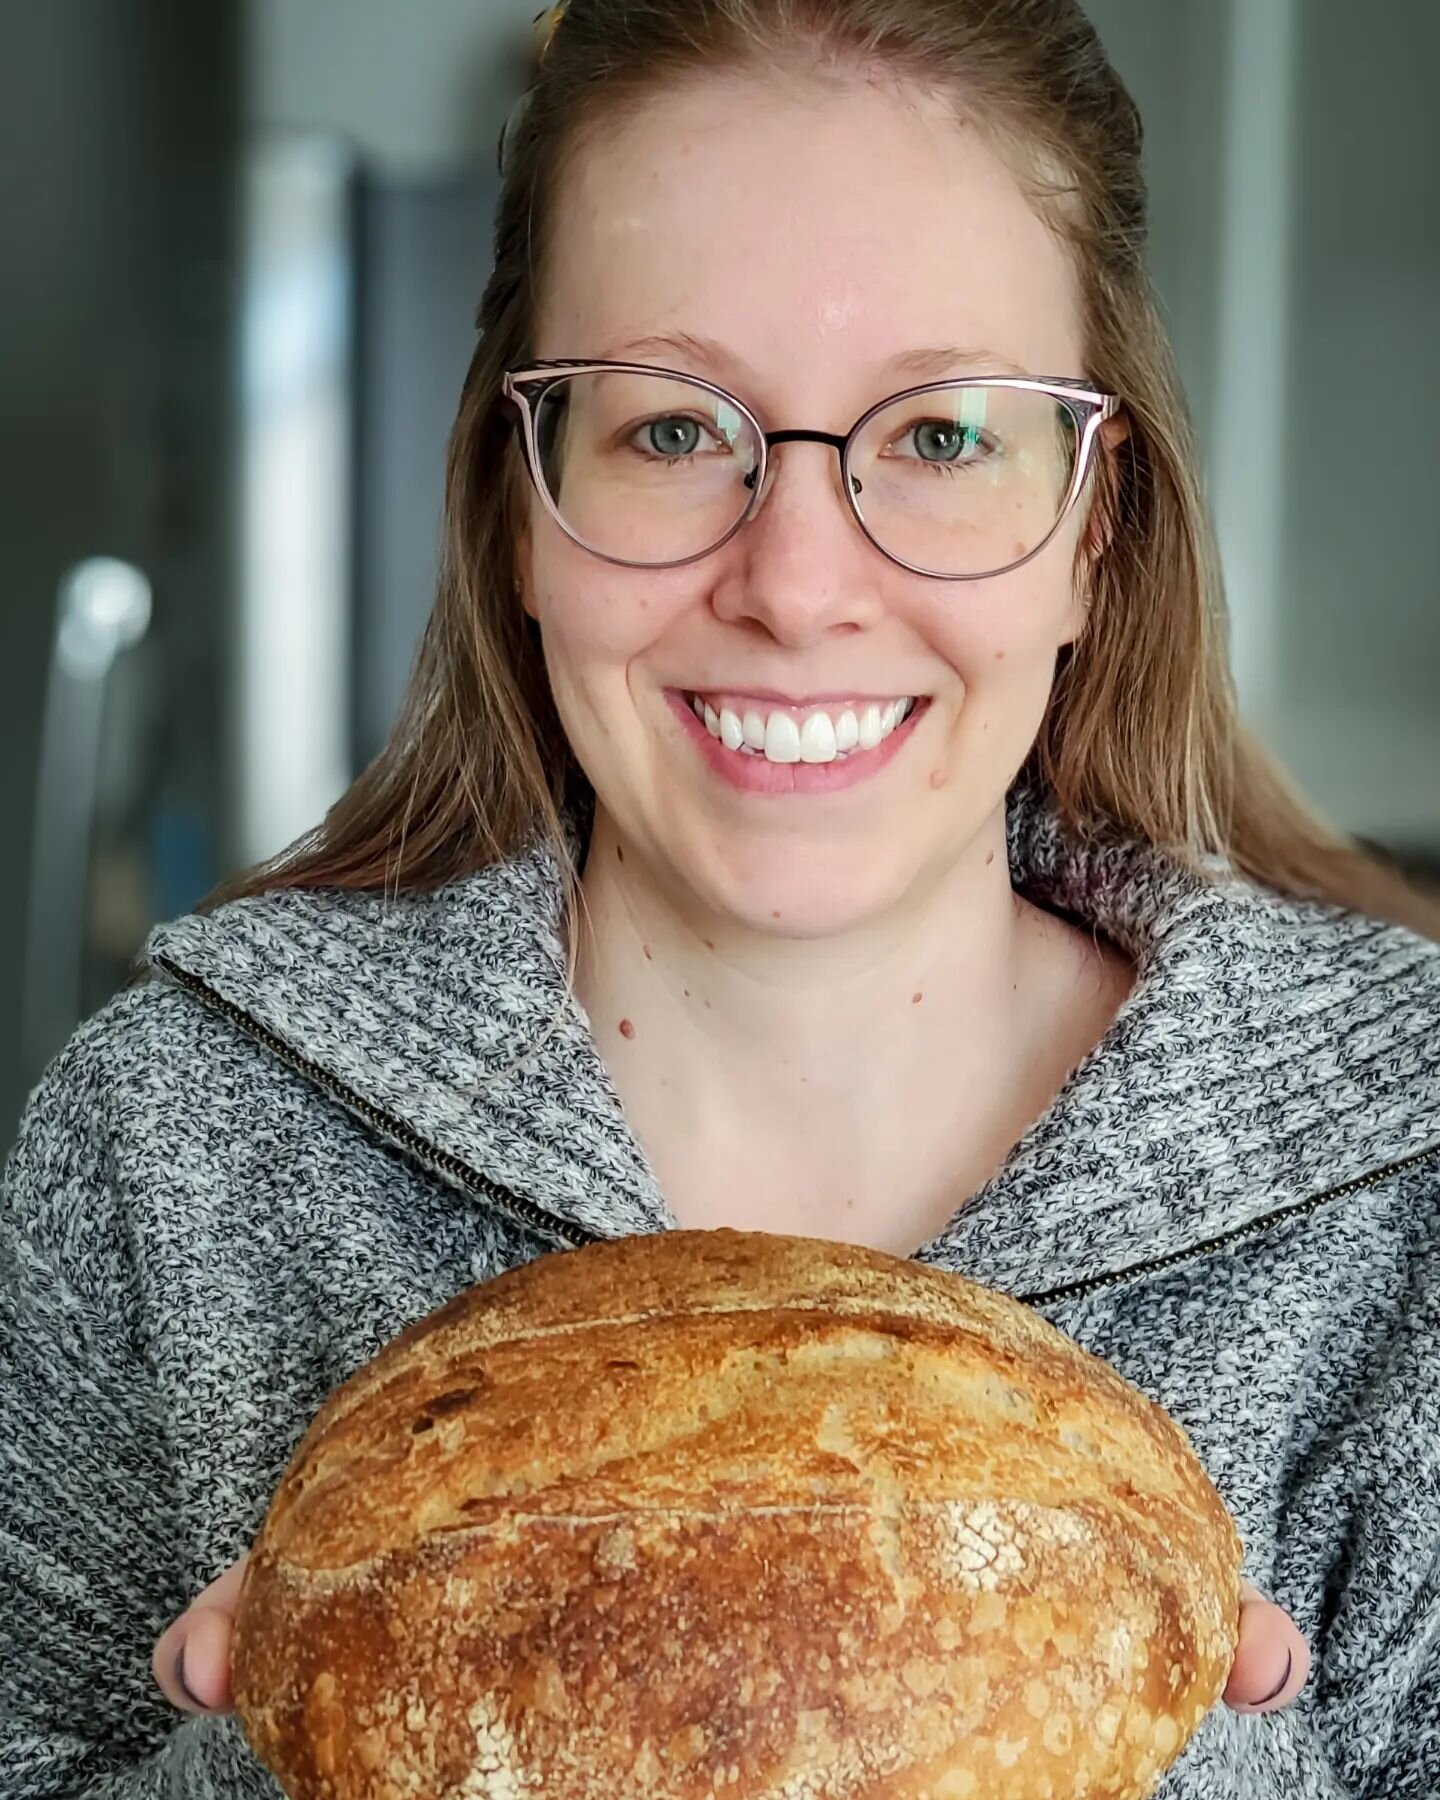 This week on Bread Weekly. 

Meet Brittany, an aspiring Sourdough Bread Baker. Join her on a journey from starter to finish as she rises.